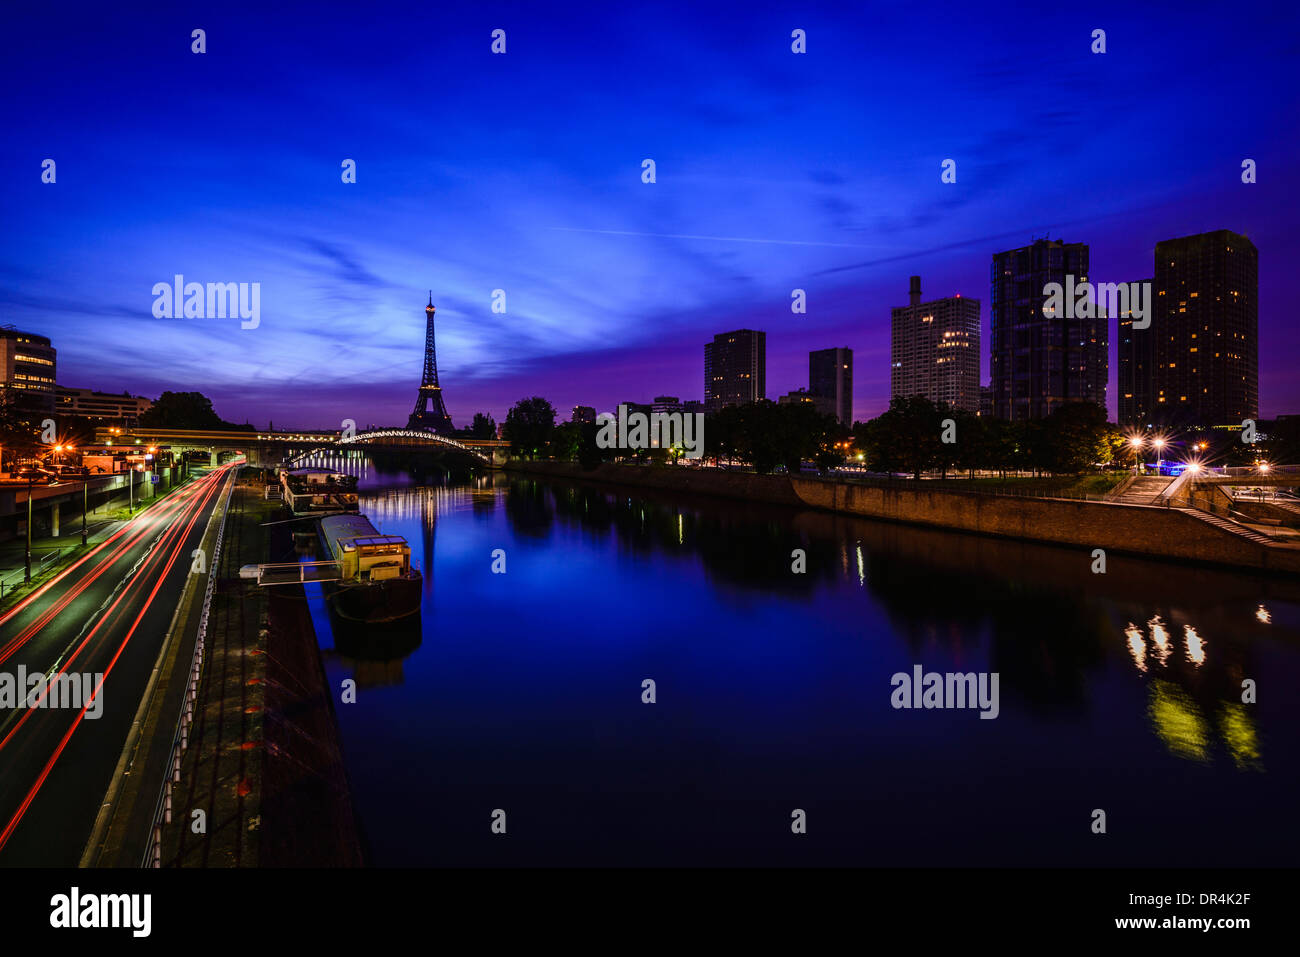 Eiffel Tower and Seine River at night, Paris, France Stock Photo